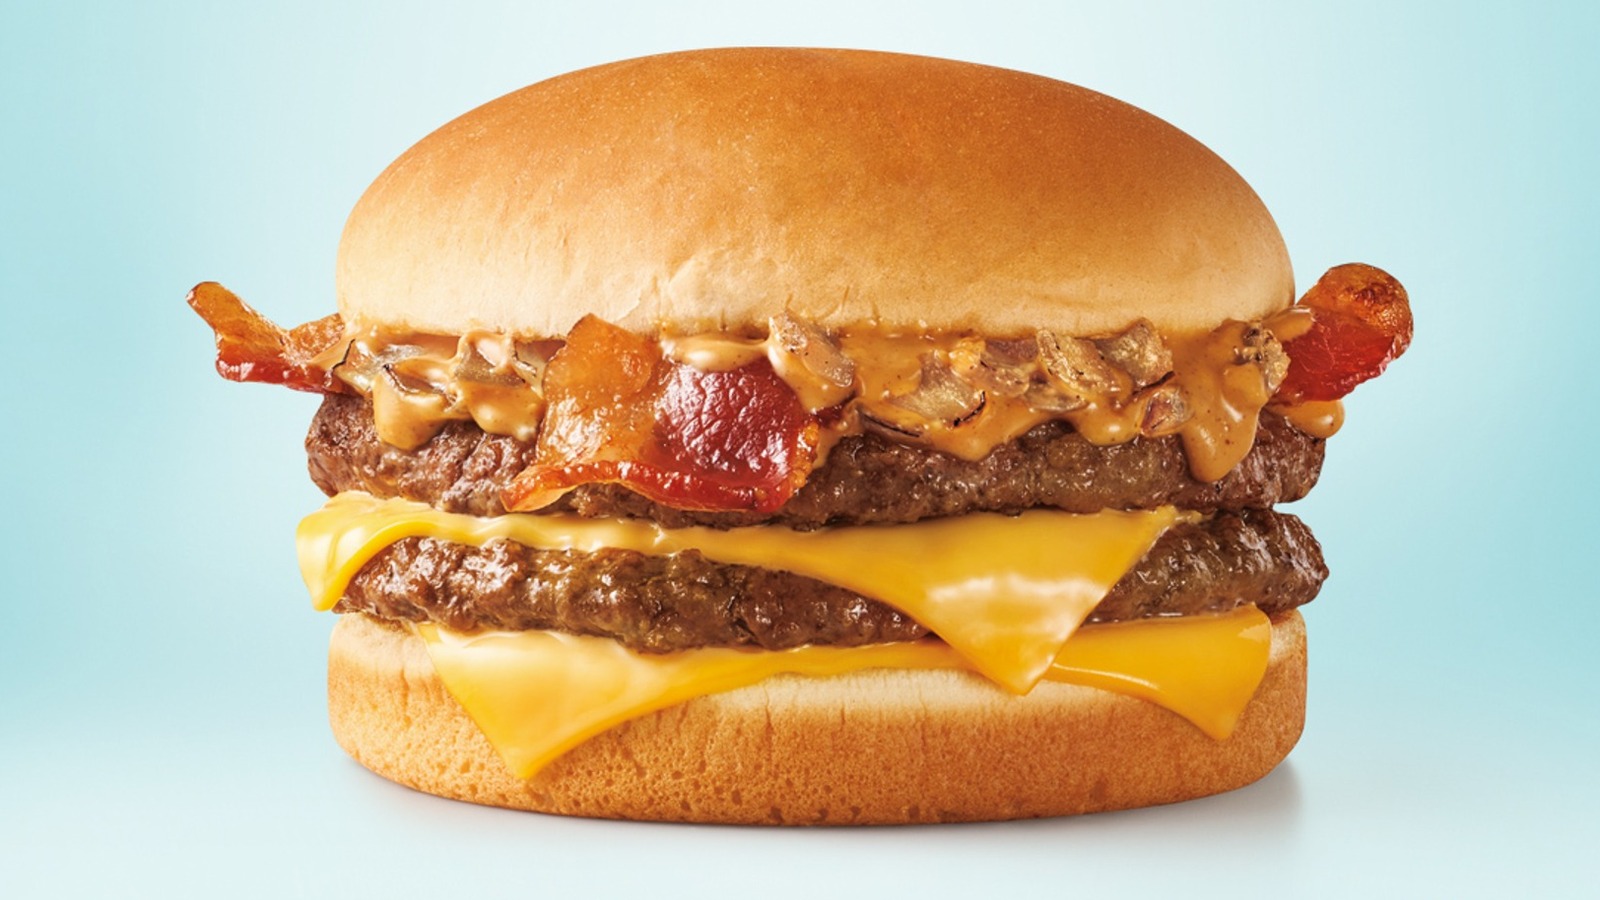 Sonic Gets Sweet And Savory With Peanut Butter Bacon Burger And Shake